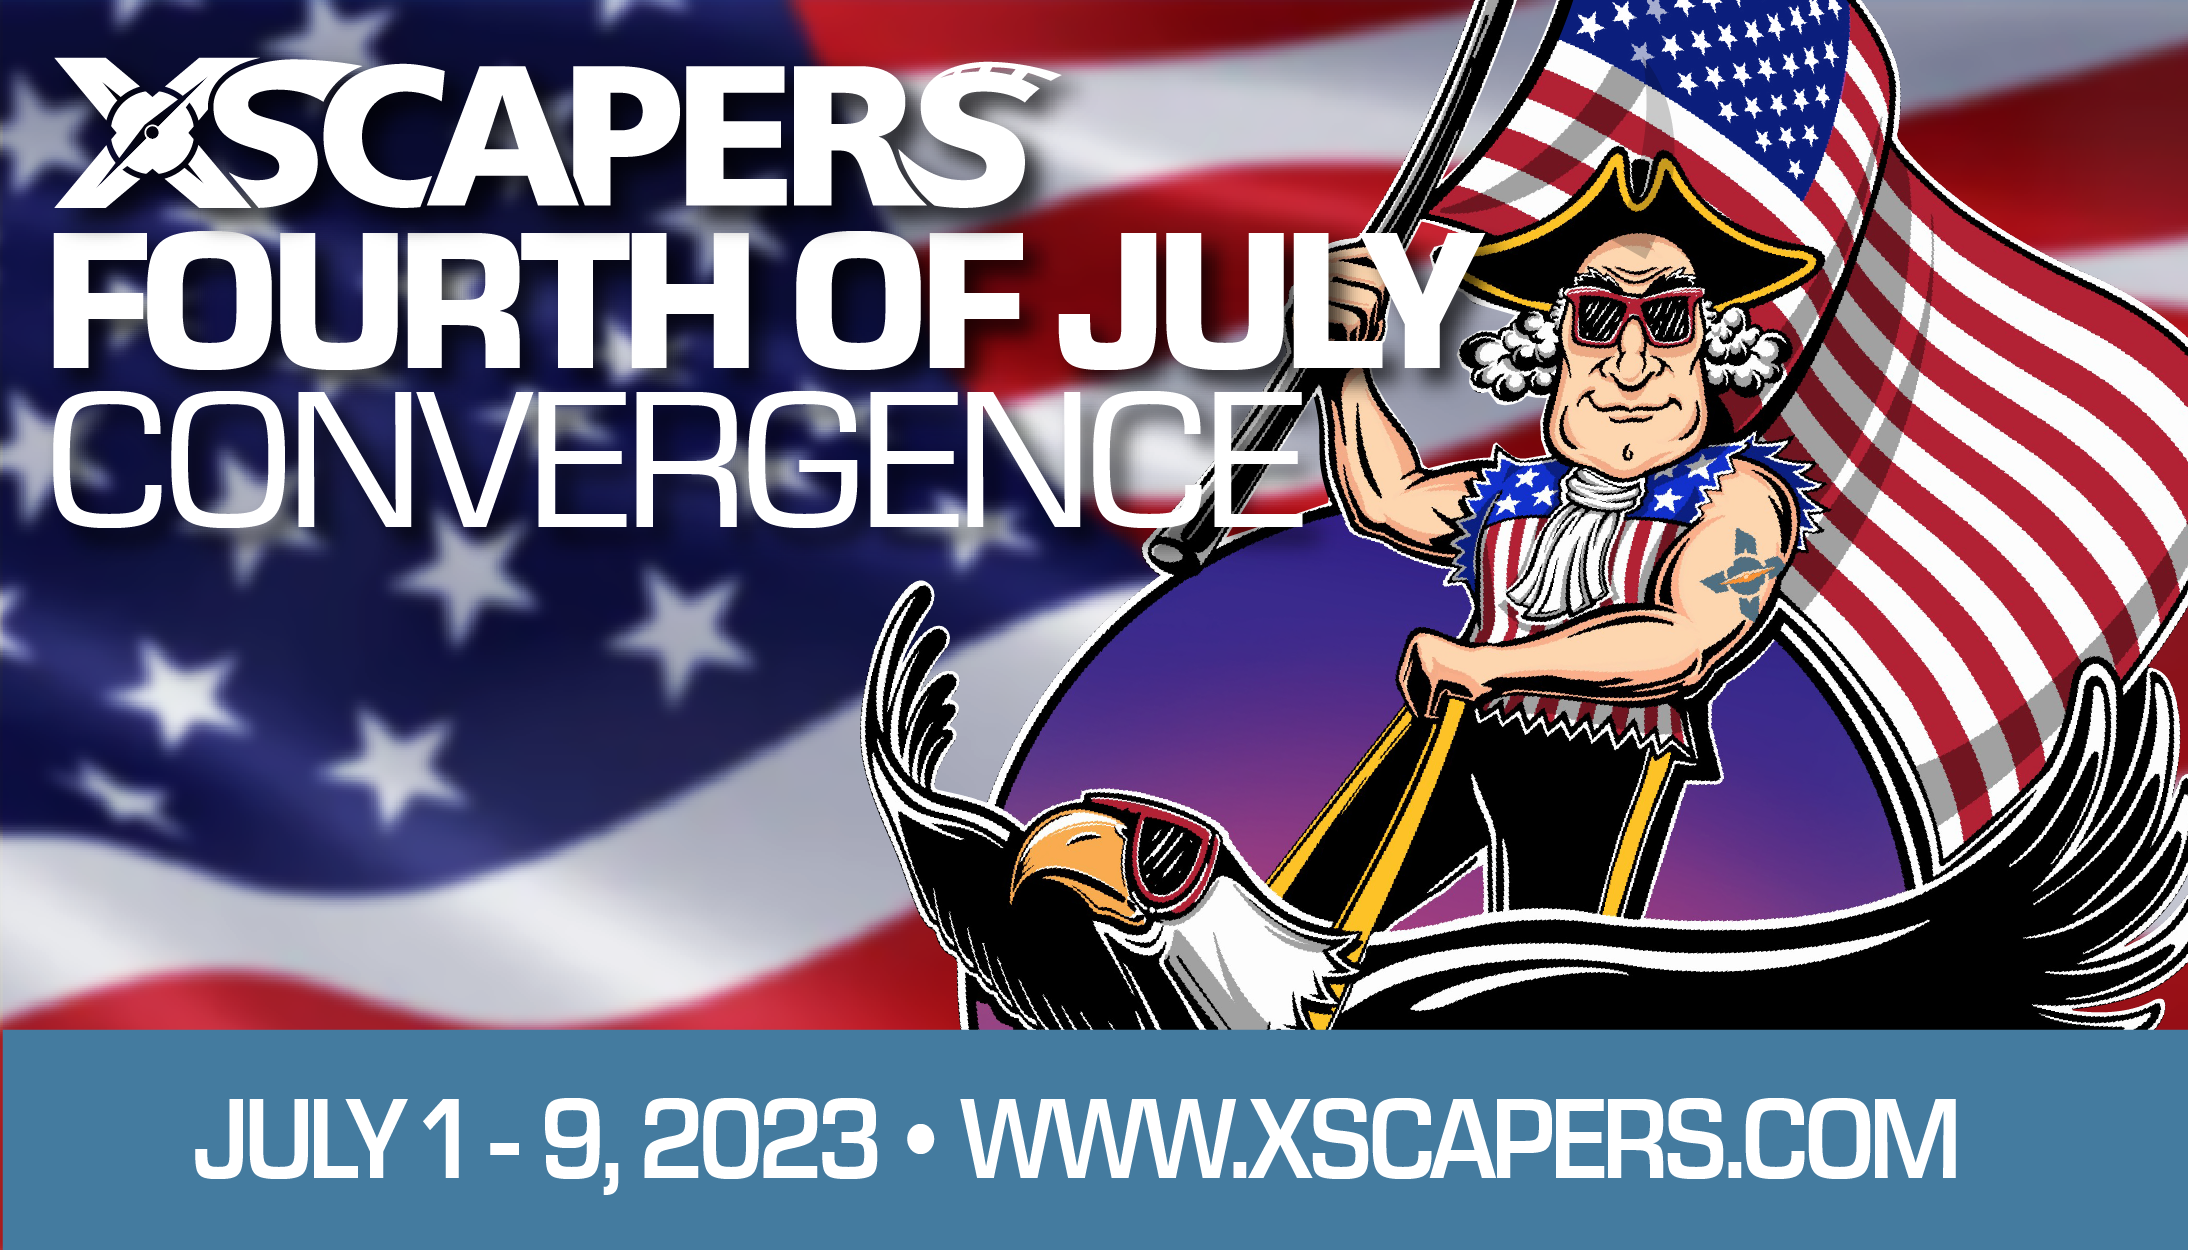 Xscapers 4th of July Convergence 2023 1